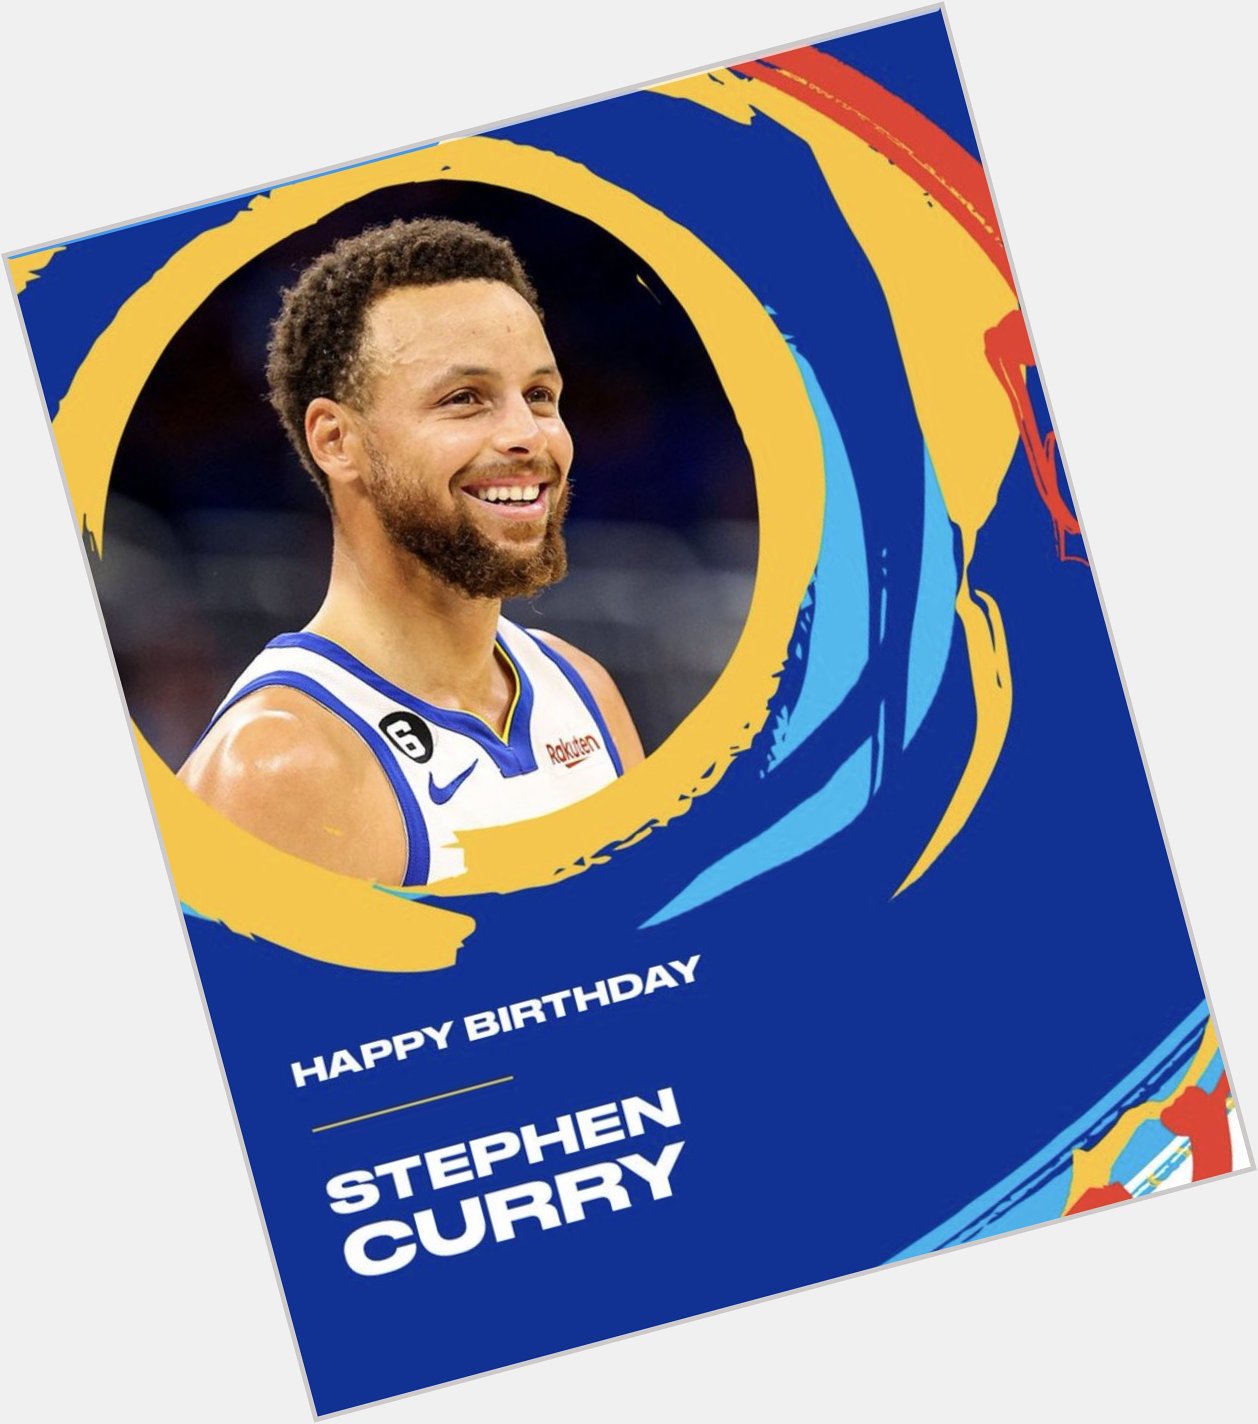 Happy birthday to the baby face assassin Stephen Curry. 